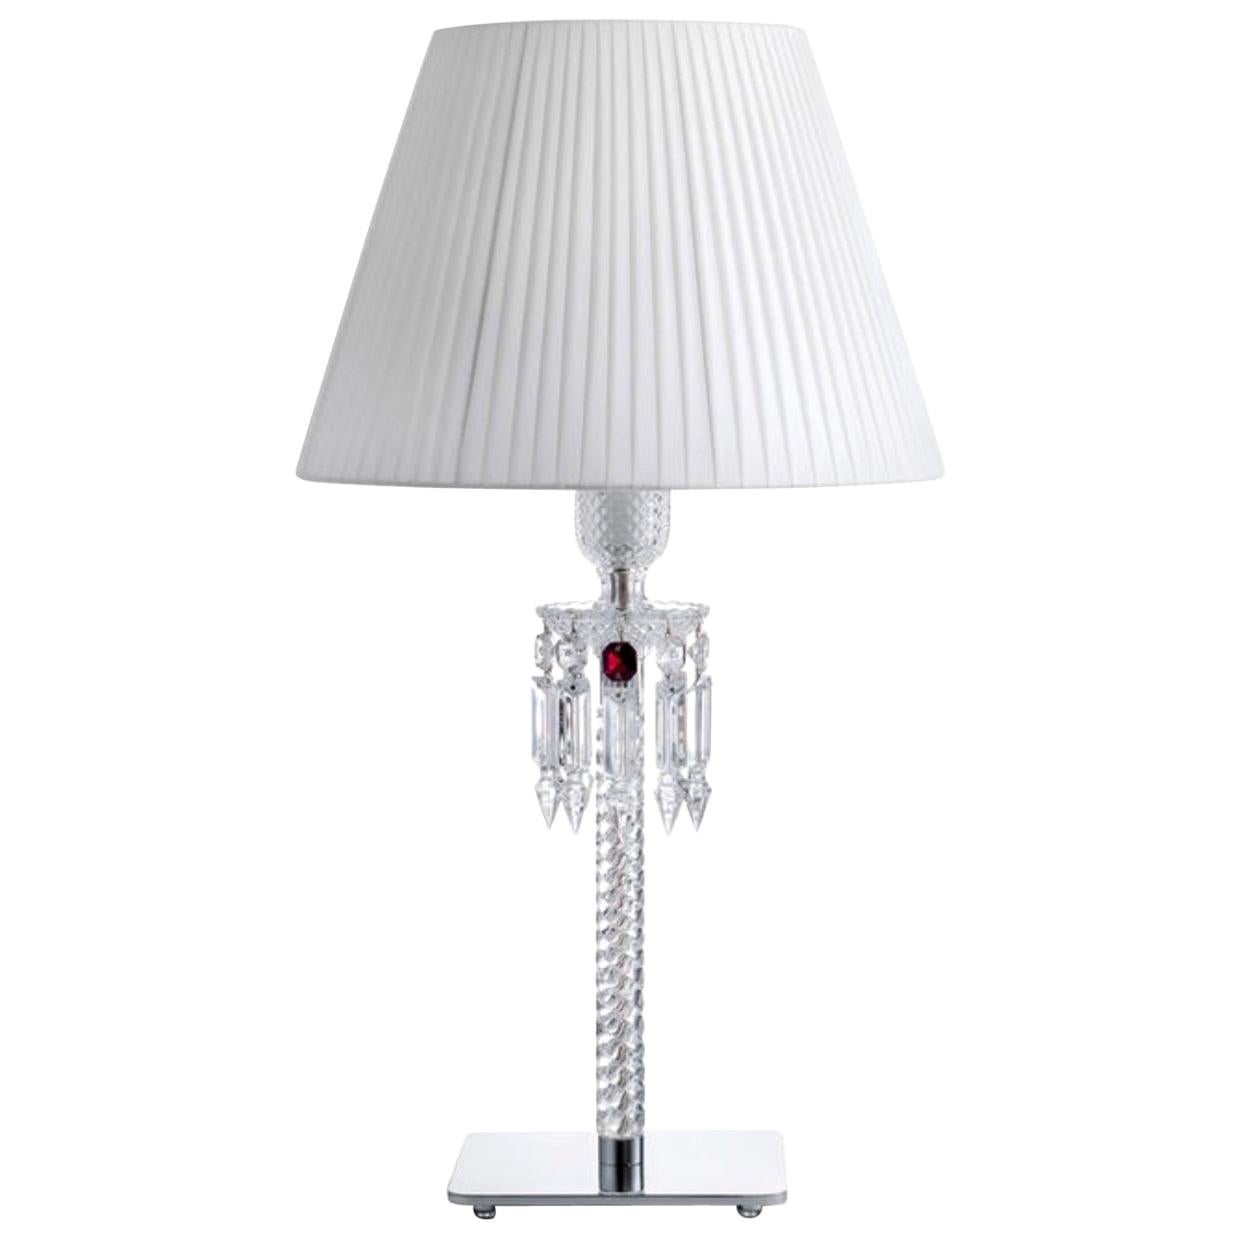 Baccarat Clear Crystal Table Lamp Arik Levy Design with Silk Lampshade